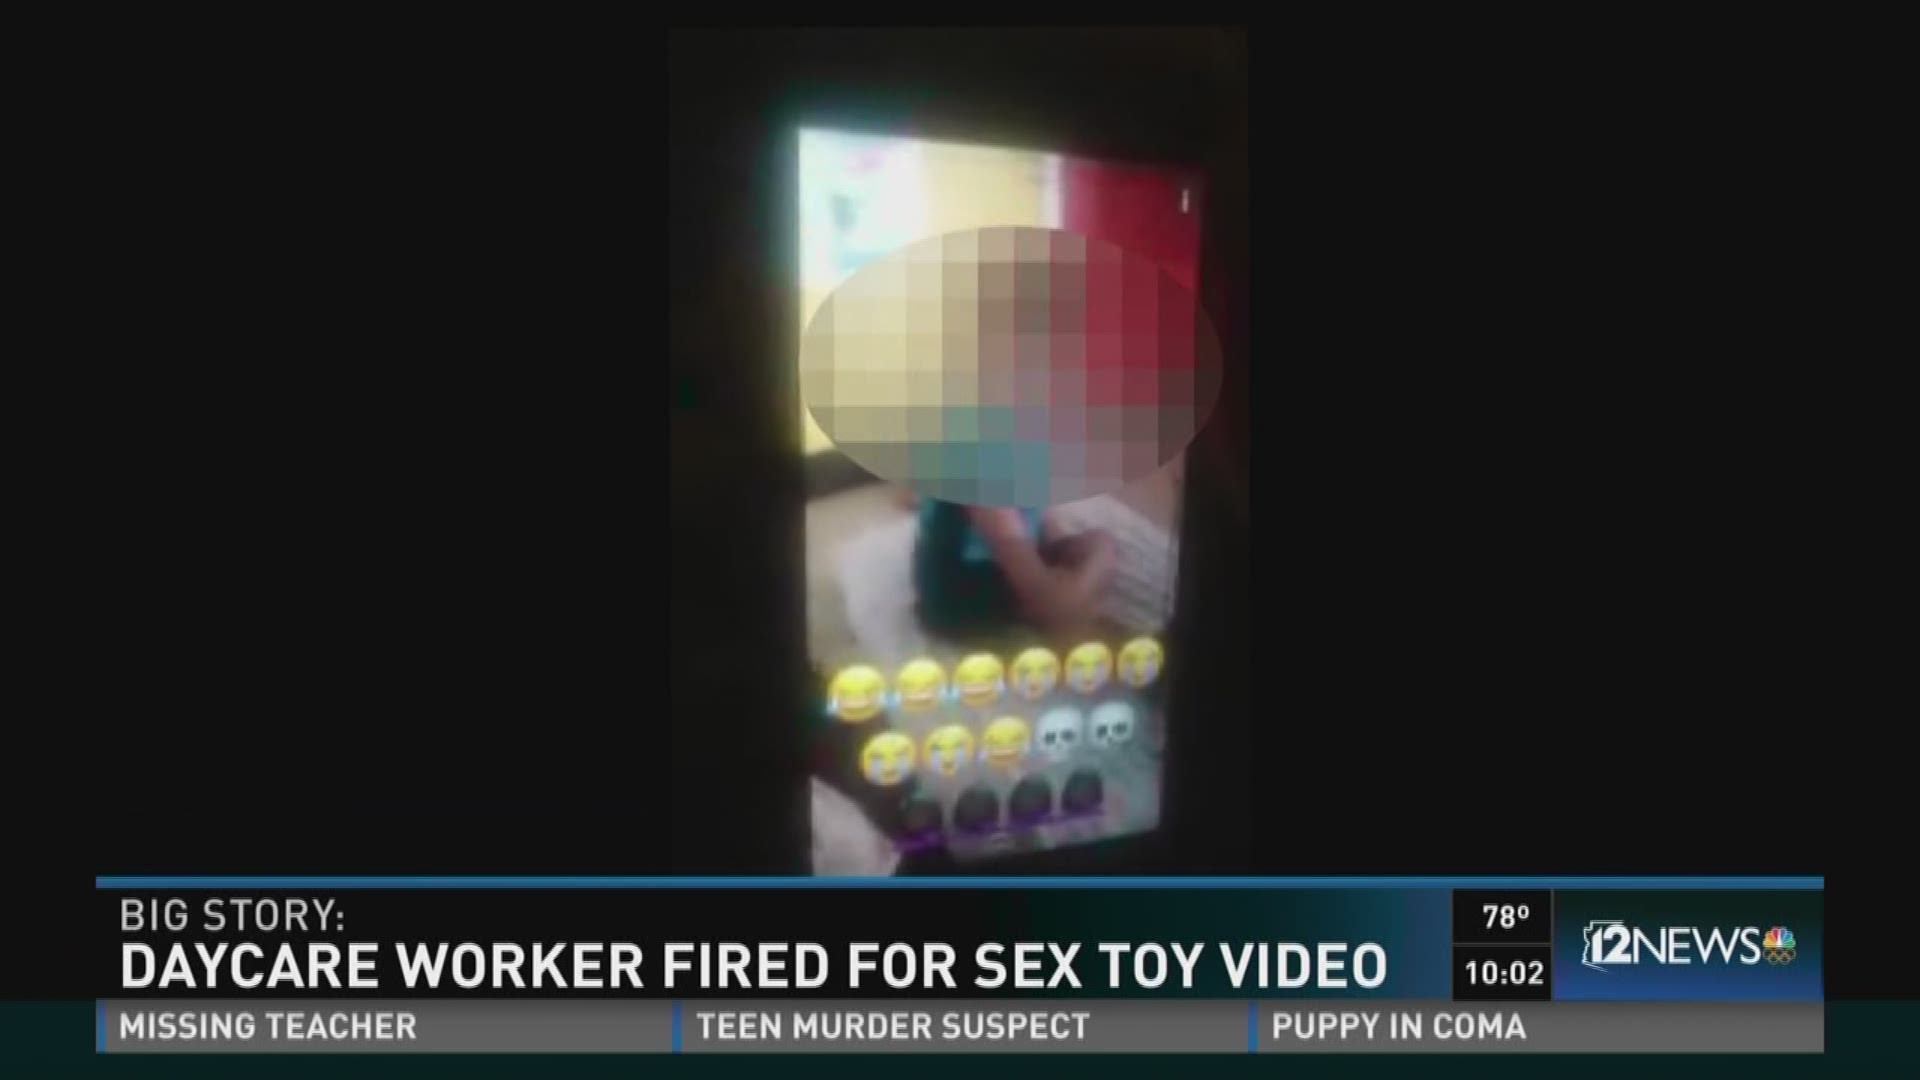 Caild Sexvideos - Child care workers play with sex toy at work, post video online | 13wmaz.com